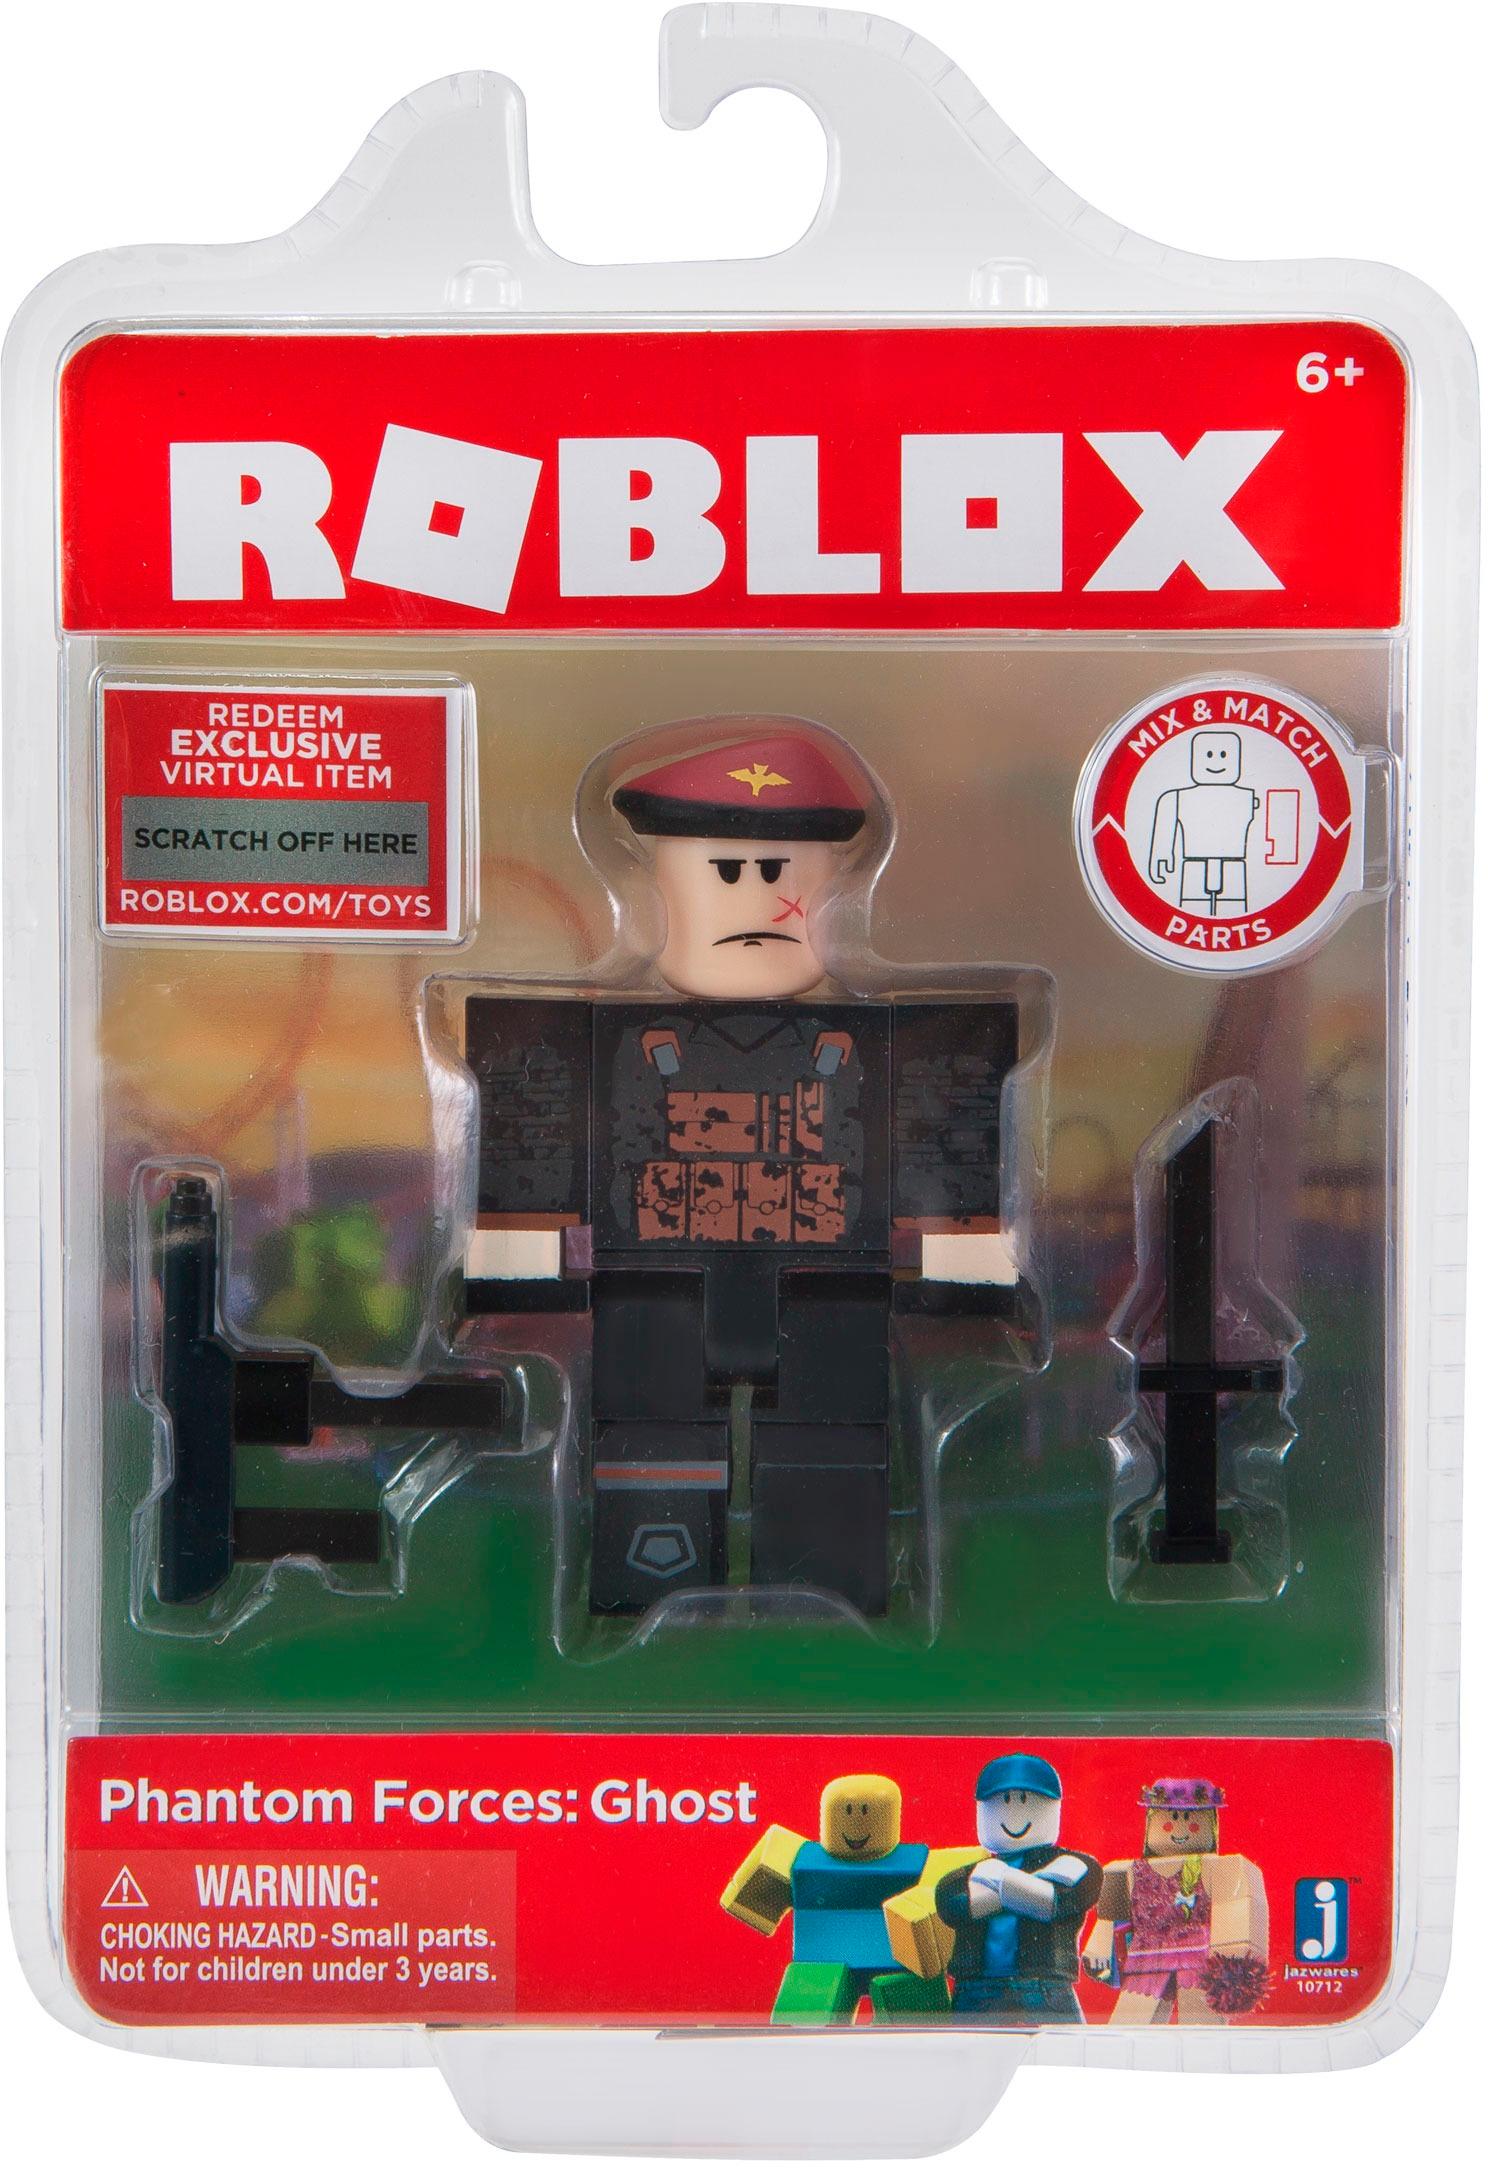 Best Buy Roblox Core Figure Styles May Vary 10705 - roblox toys series 3 core packs